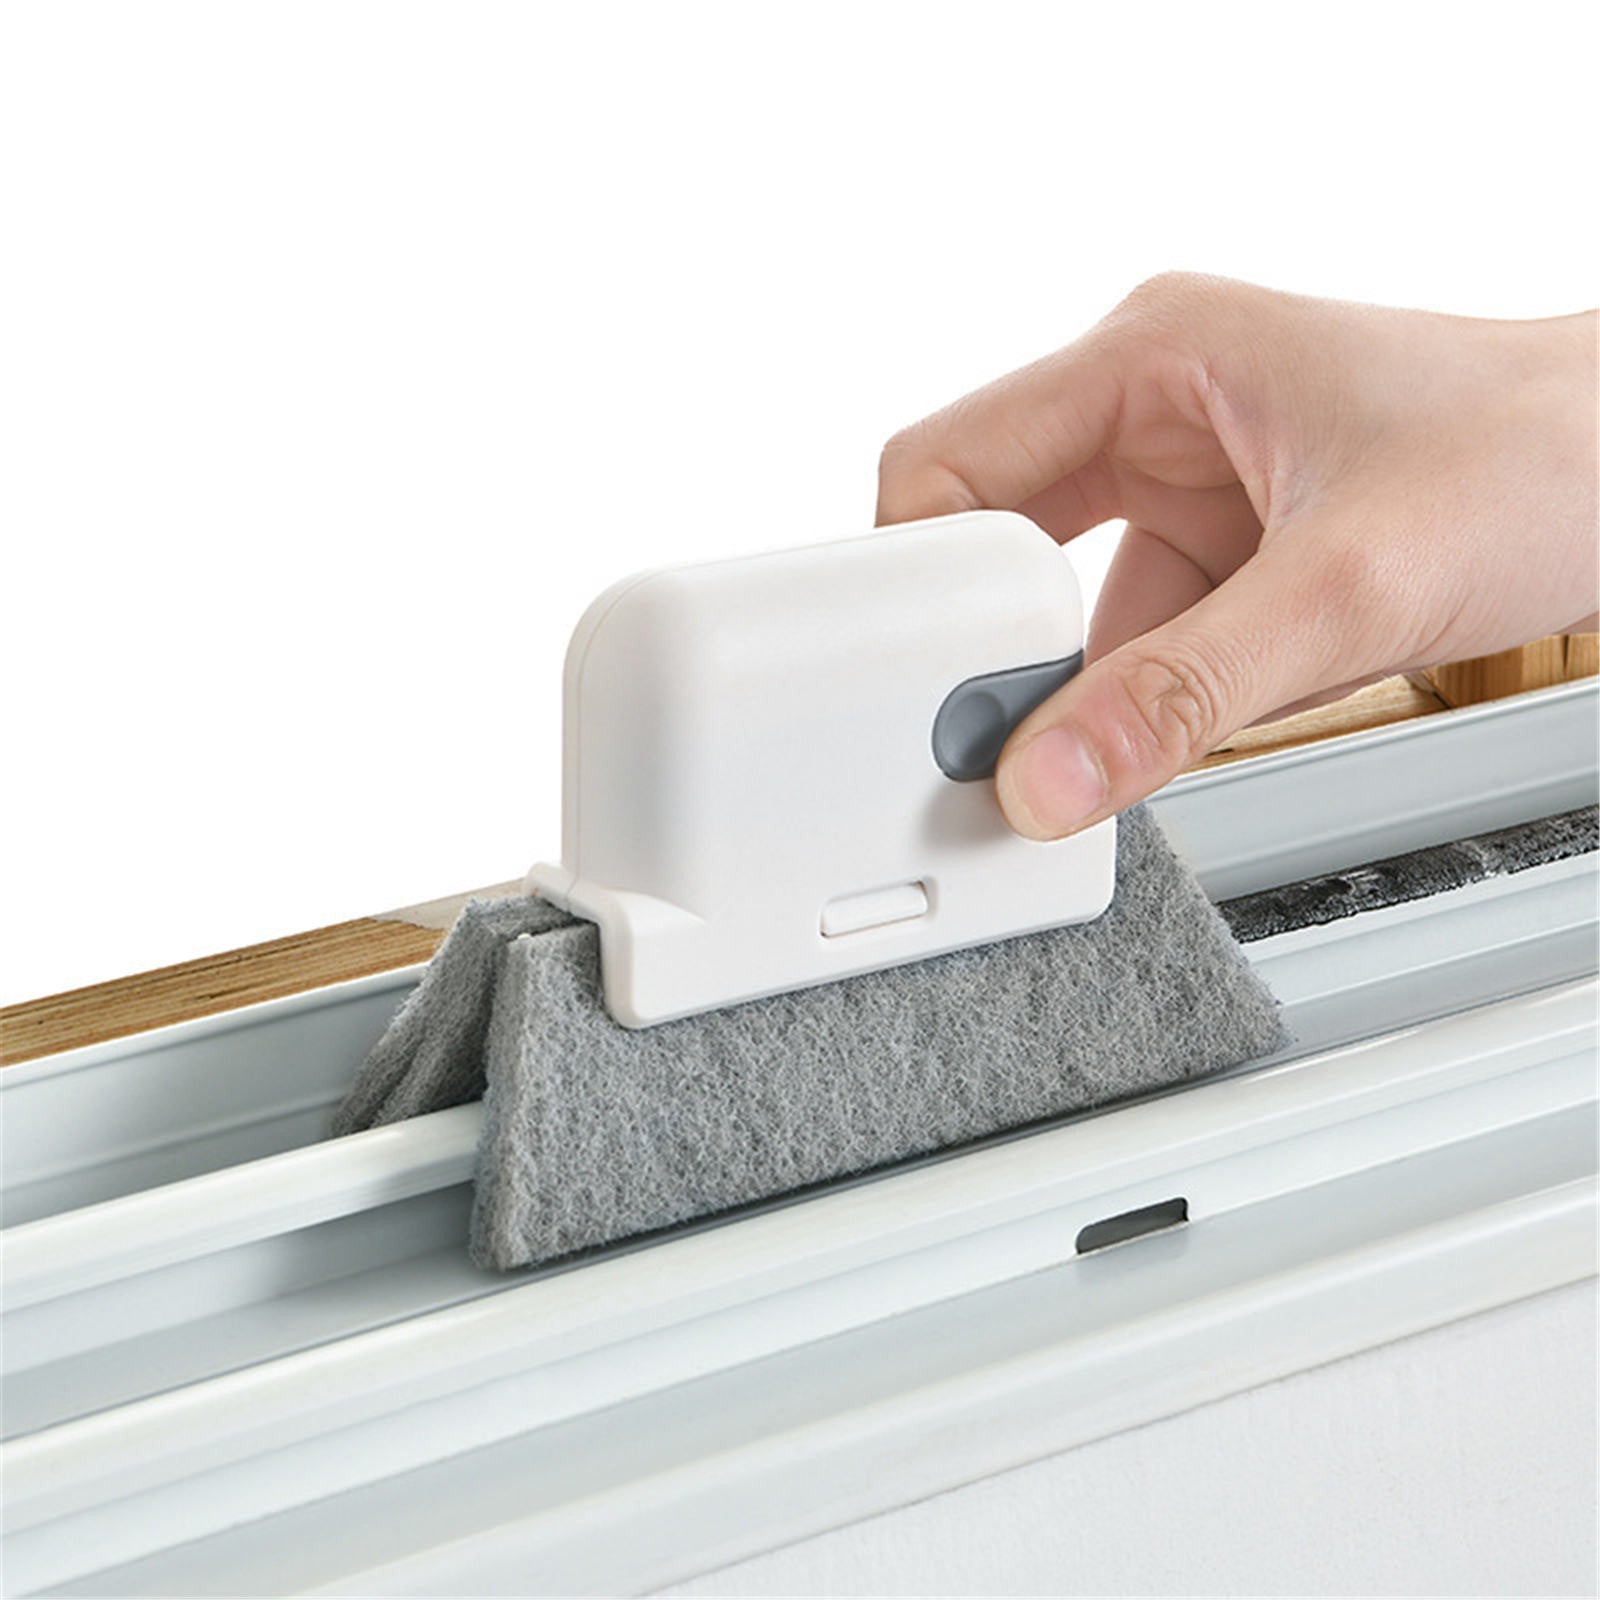 Cleaning Brush For Corners And Gaps Detachable Door And Windows